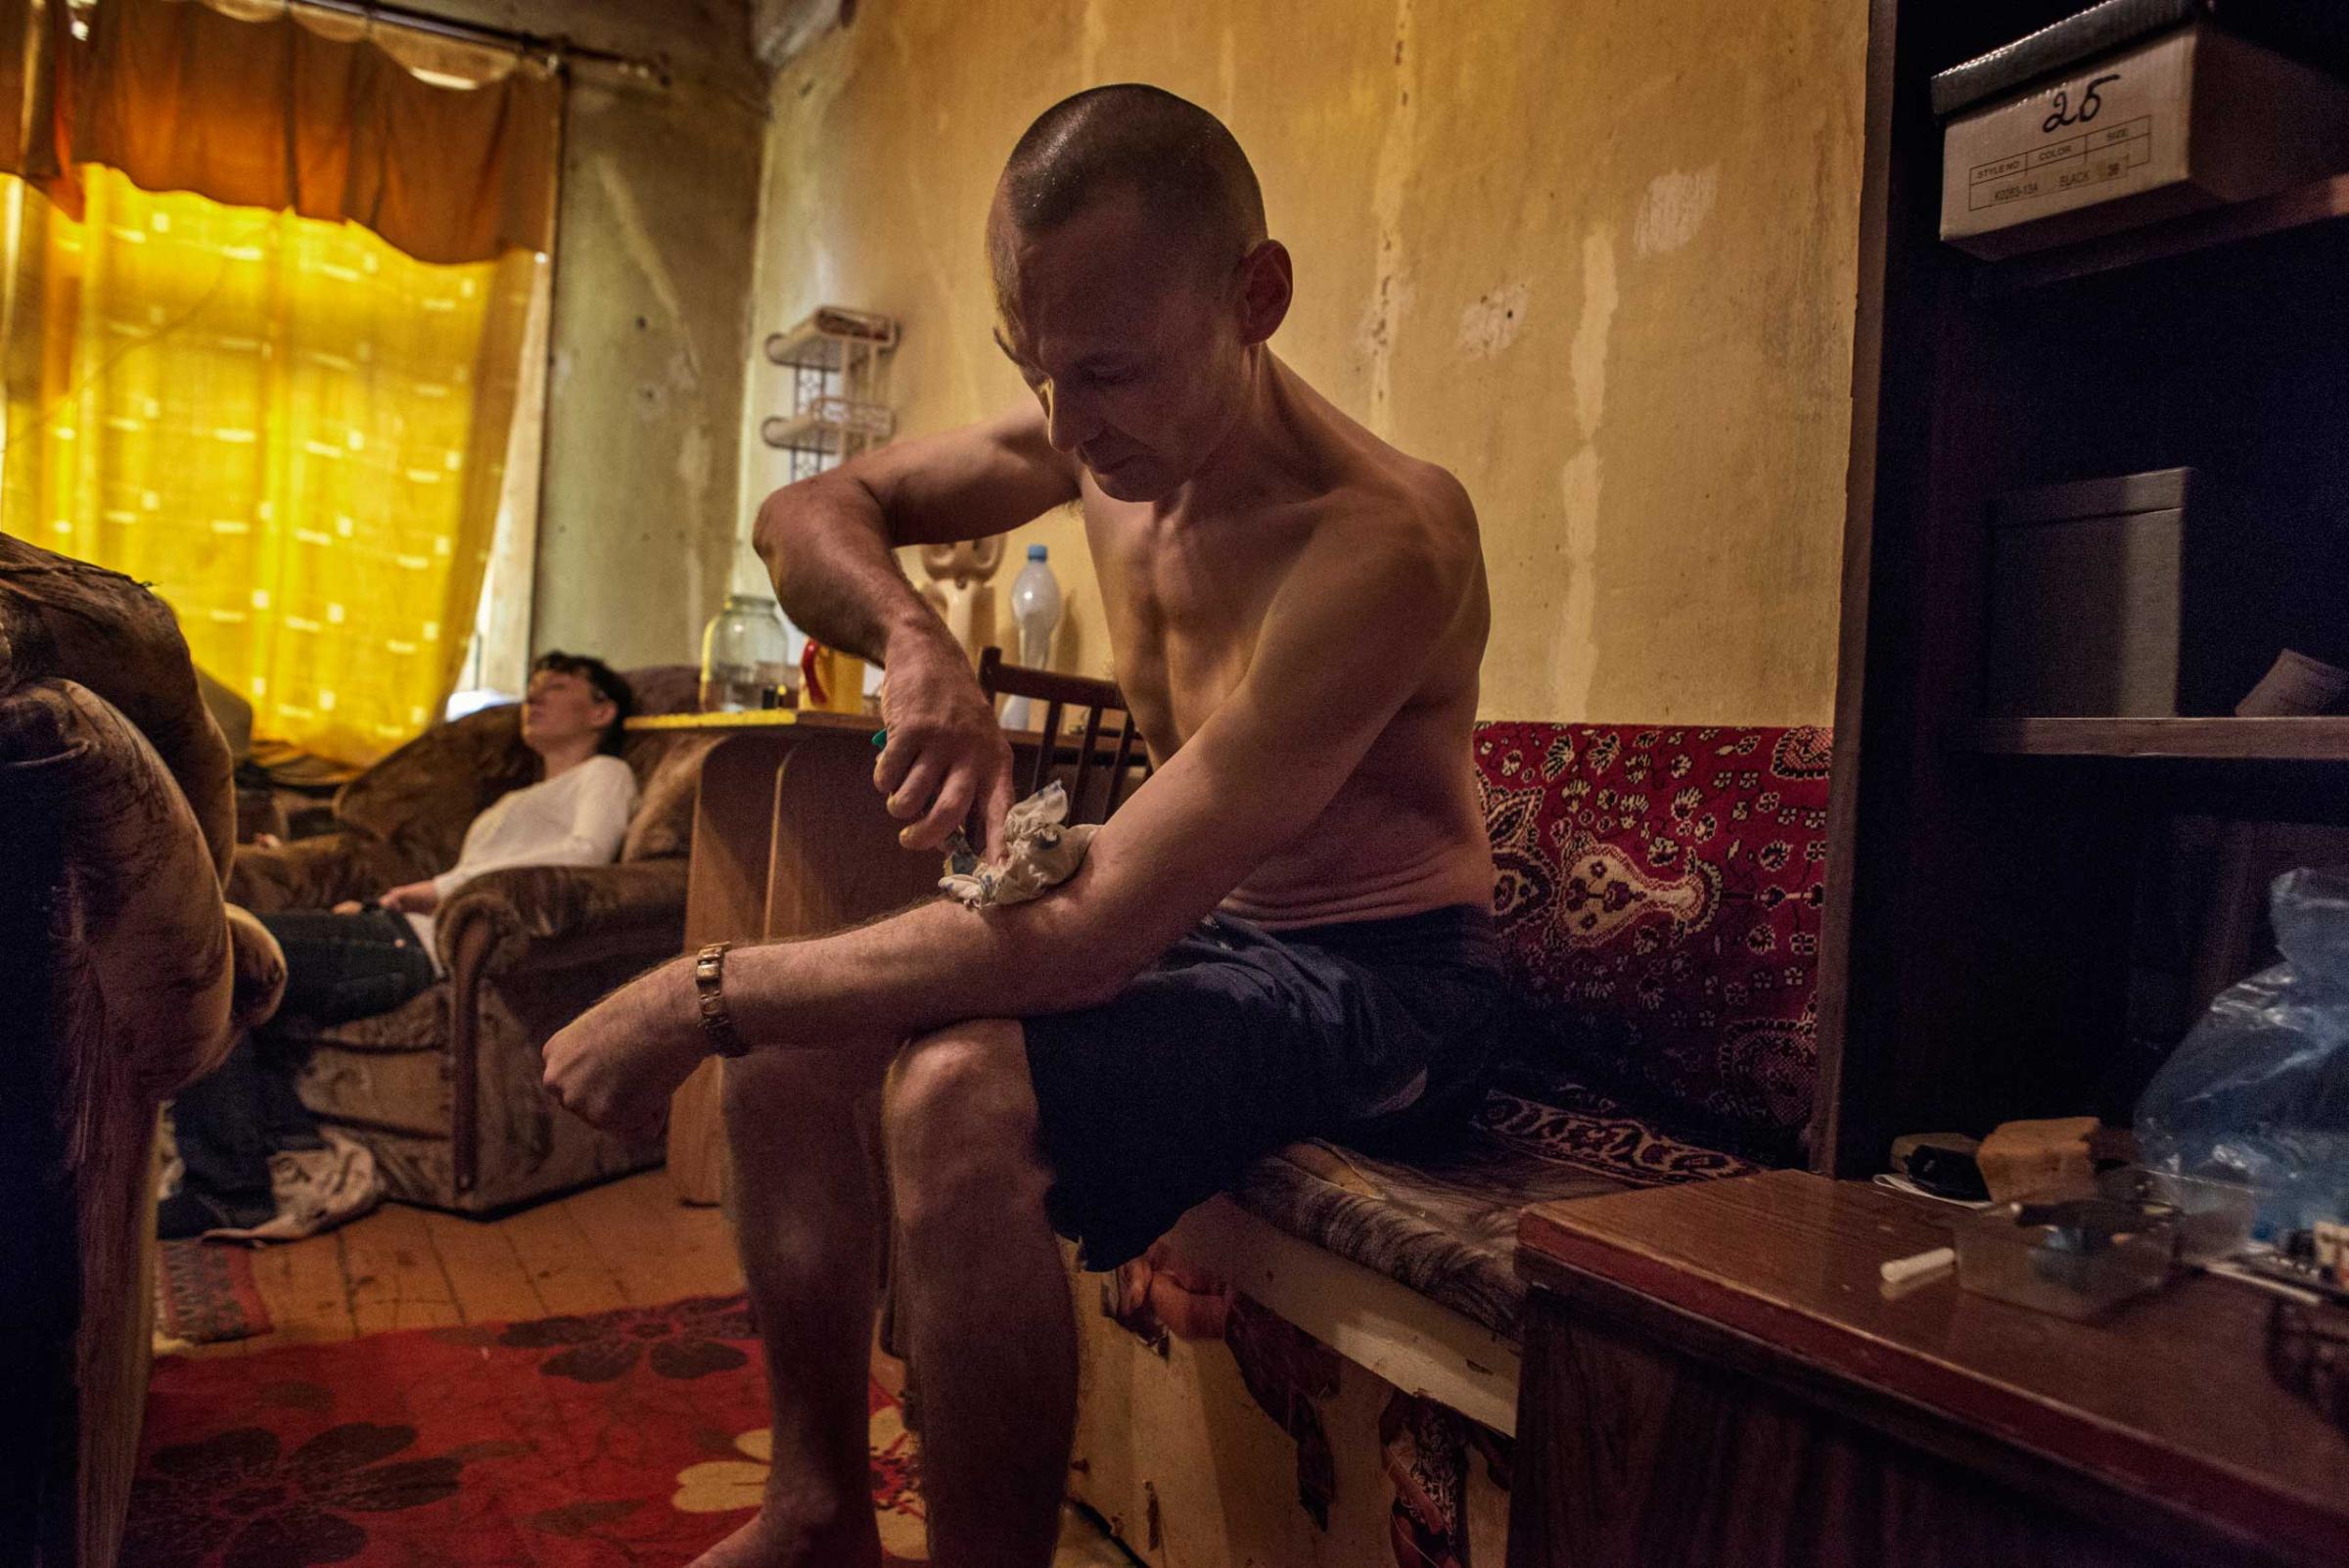 Andrey injects krokodil, with Zhanna in the background already under the influence of the drug.